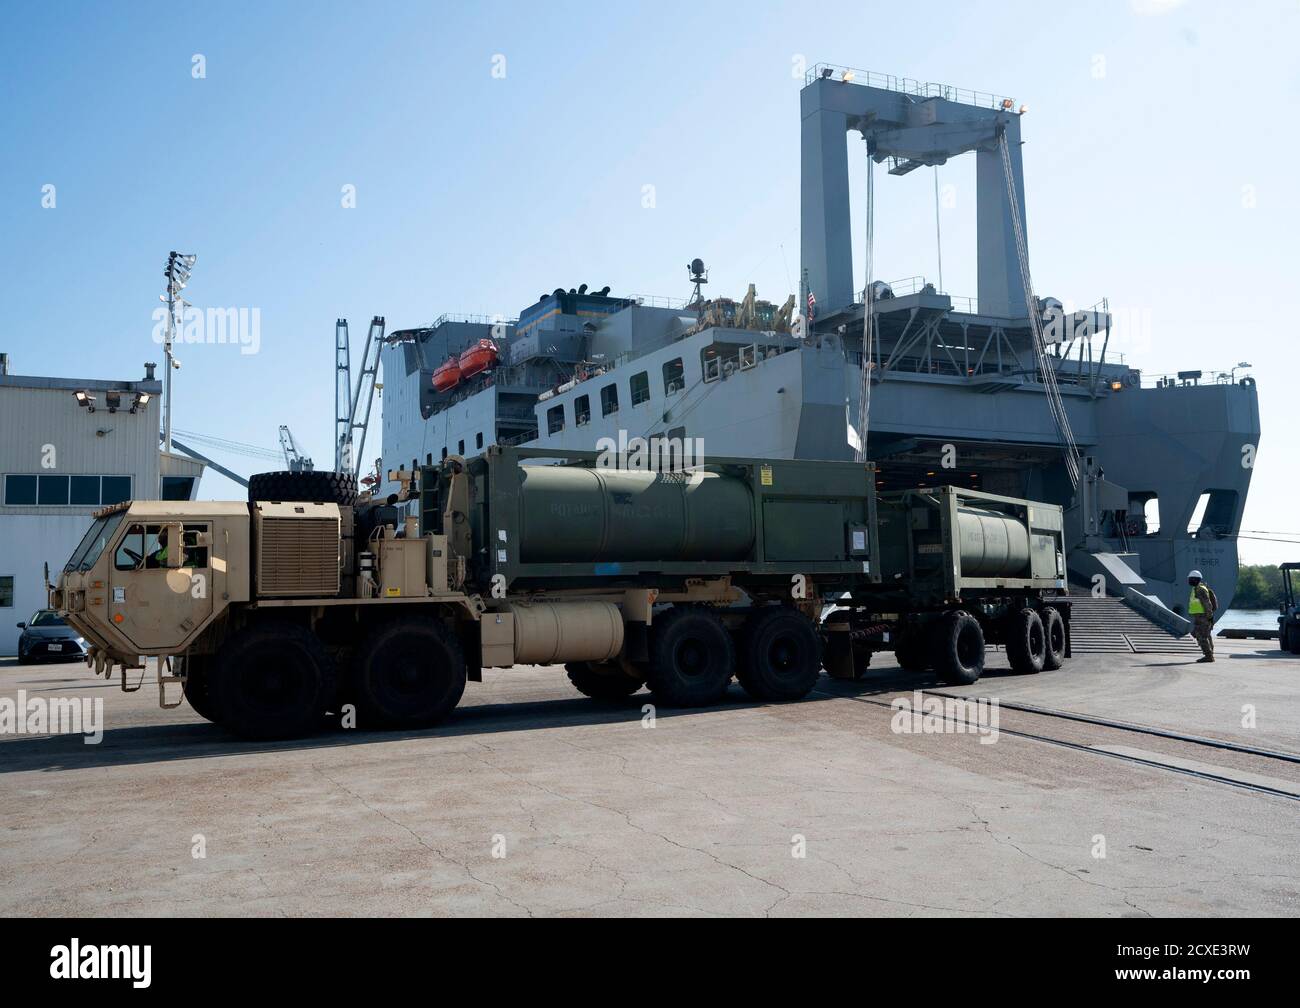 A M105 Load Handling System Compatible Water Tank Rack, (Hippo) leaves the Large, Medium- Speed, Roll-on/Roll-off Fisher ship after a download of cargo during the Joint Readiness Exercise 20, at the Port of Port Arthur, Texas, Sept. 26, 2020. The exercise assessed units’ ability to respond to a published deployment order, how quickly and accurately they could prepare cargo for deployment, and how well they coordinated their arrival to the seaport. (USTRANSCOM photo by Michelle Gigante) Stock Photo